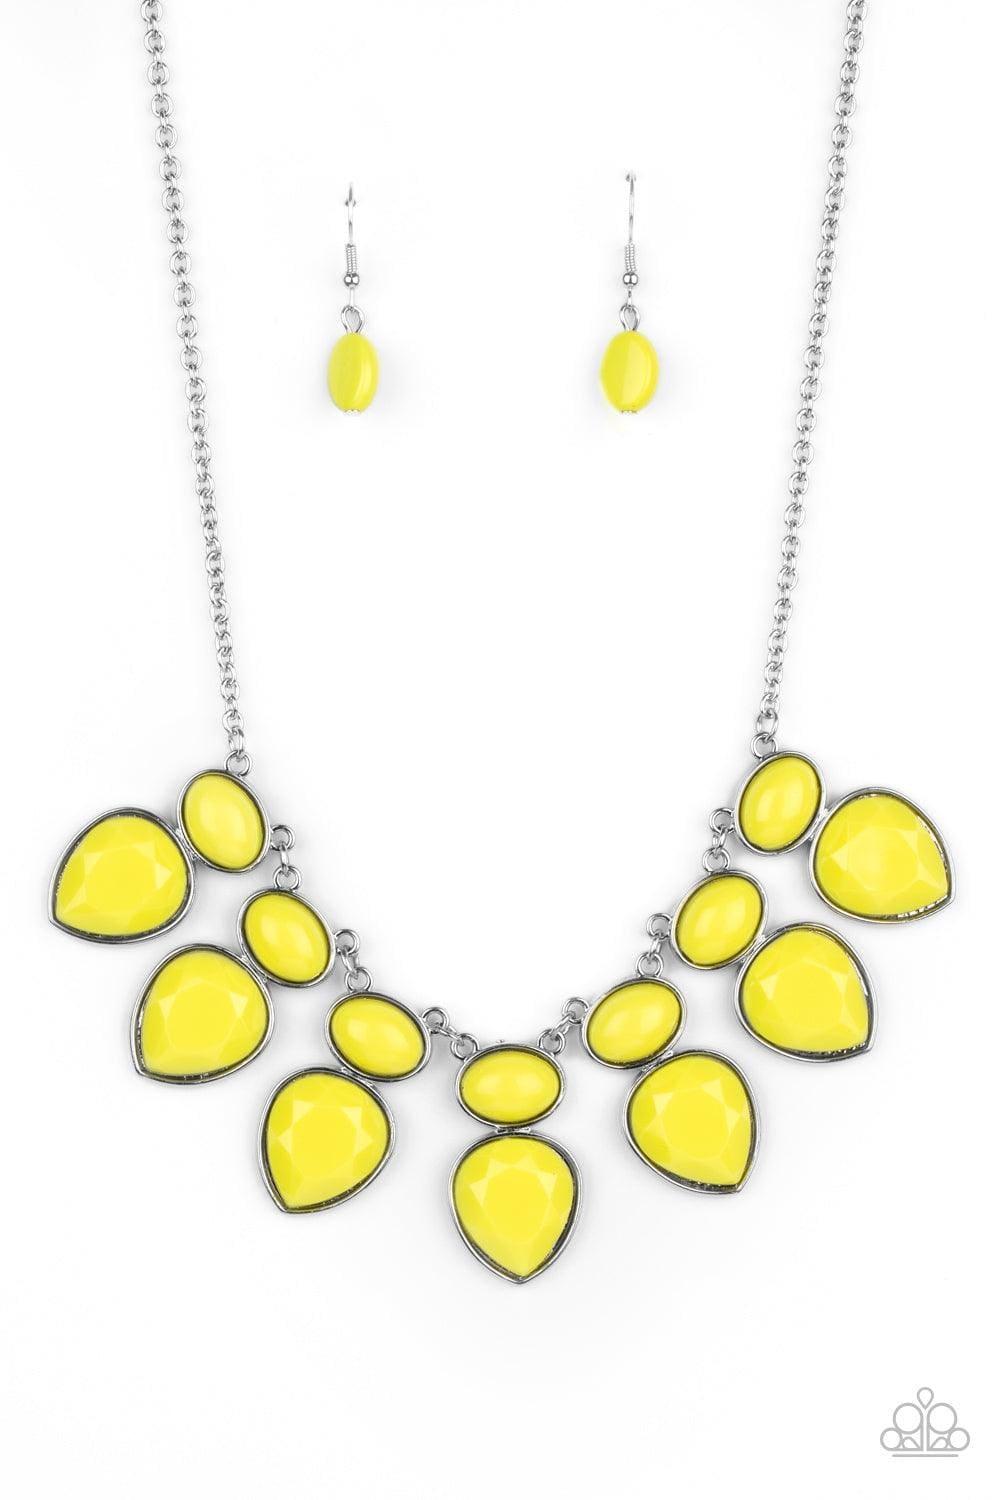 Paparazzi Accessories - Modern Masquerade - Yellow Necklace - Bling by JessieK